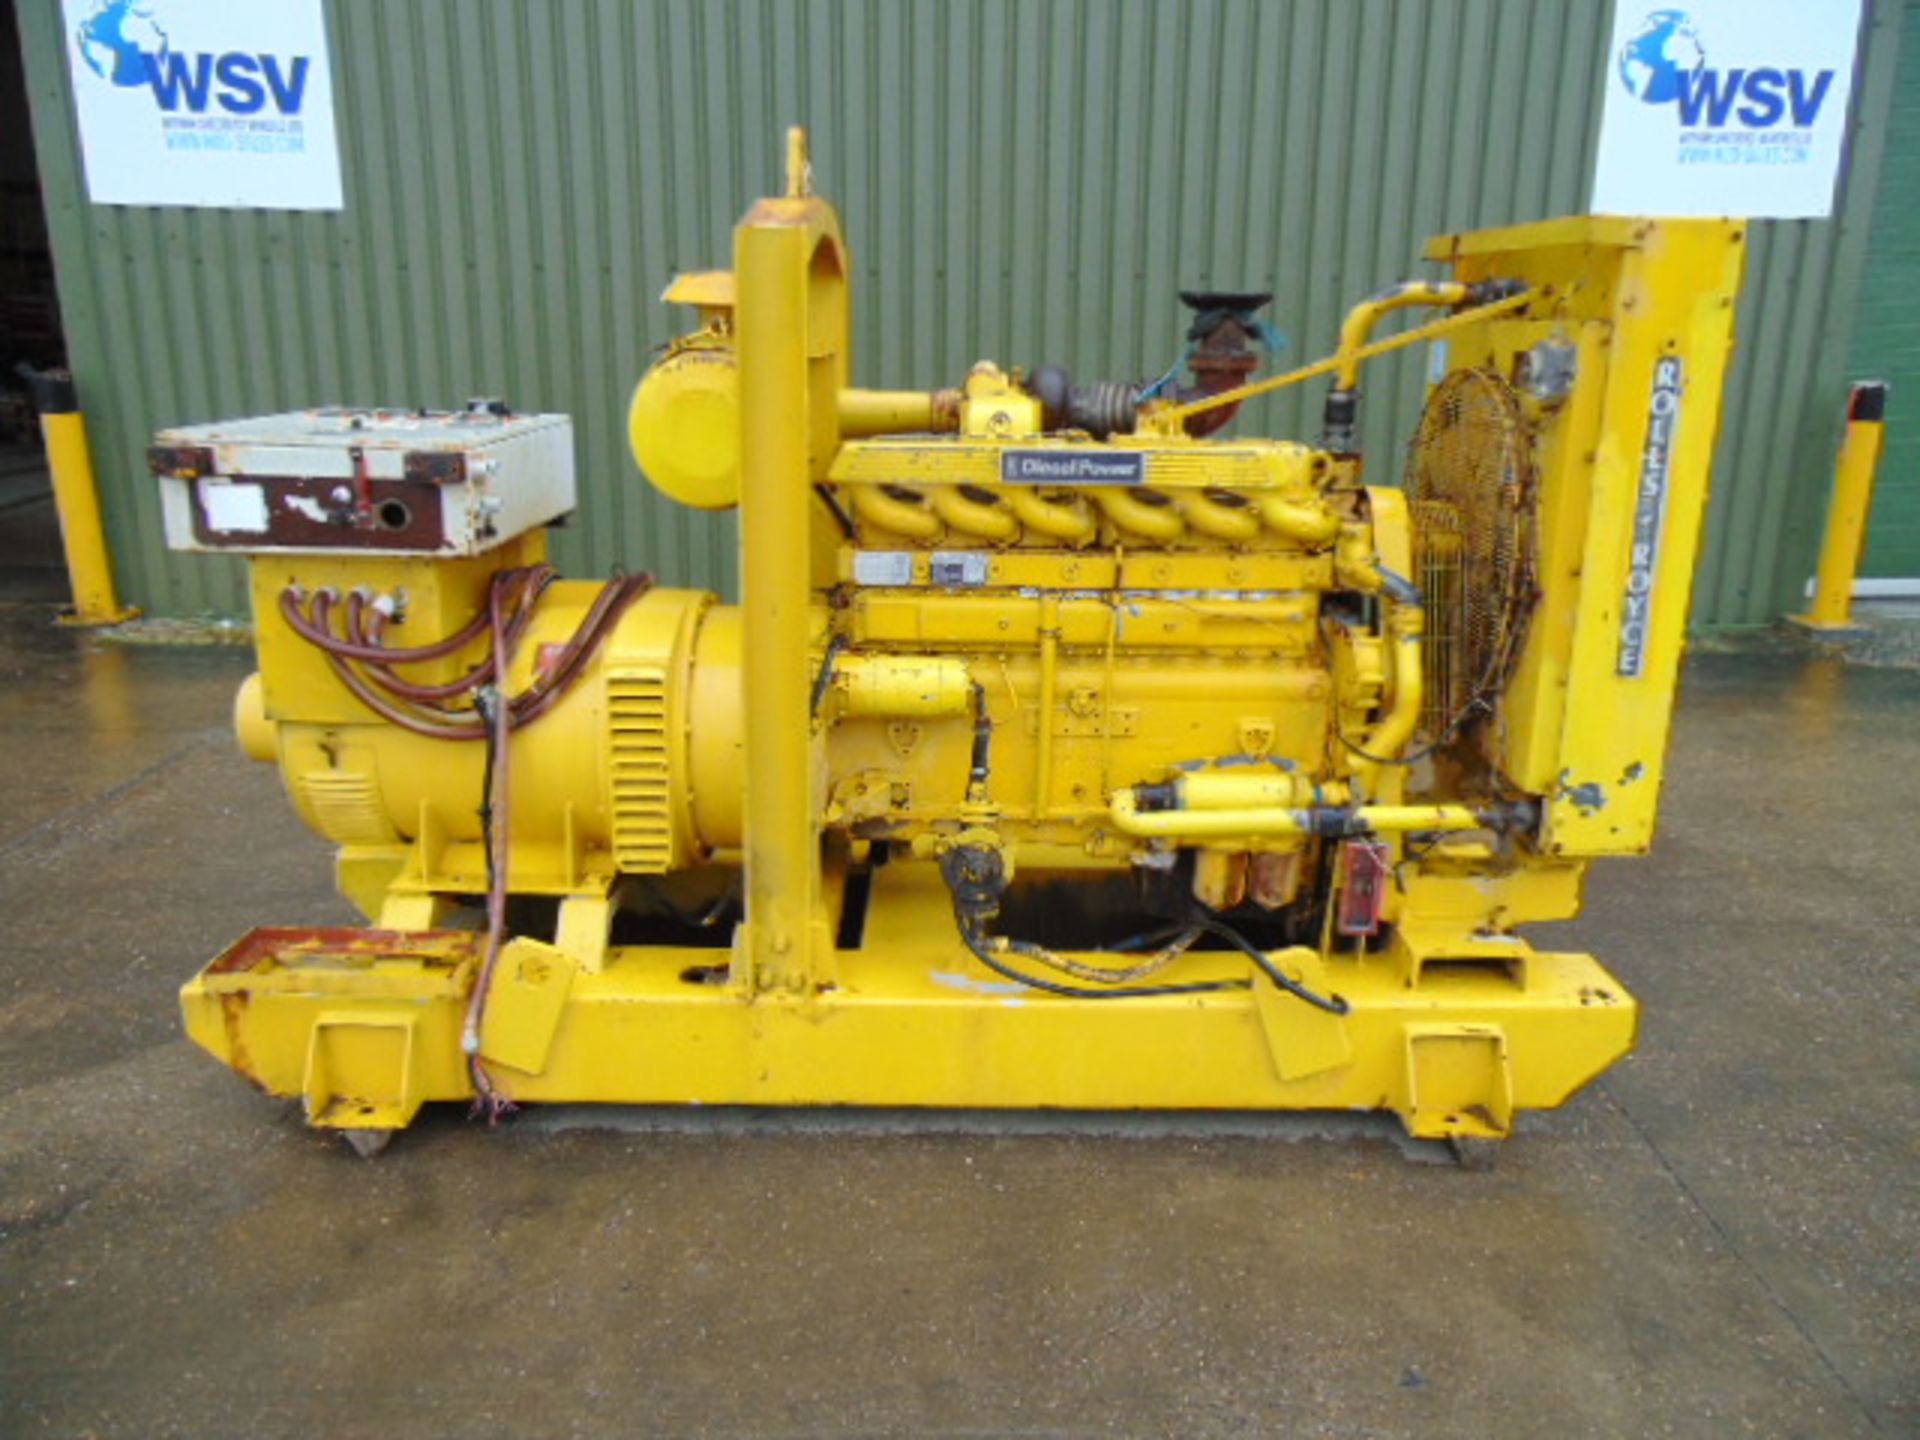 Rolls Royce Diesel Newage Stamford 125KVA Generator with Shannon Power control panel ONLY 141 HOURS!